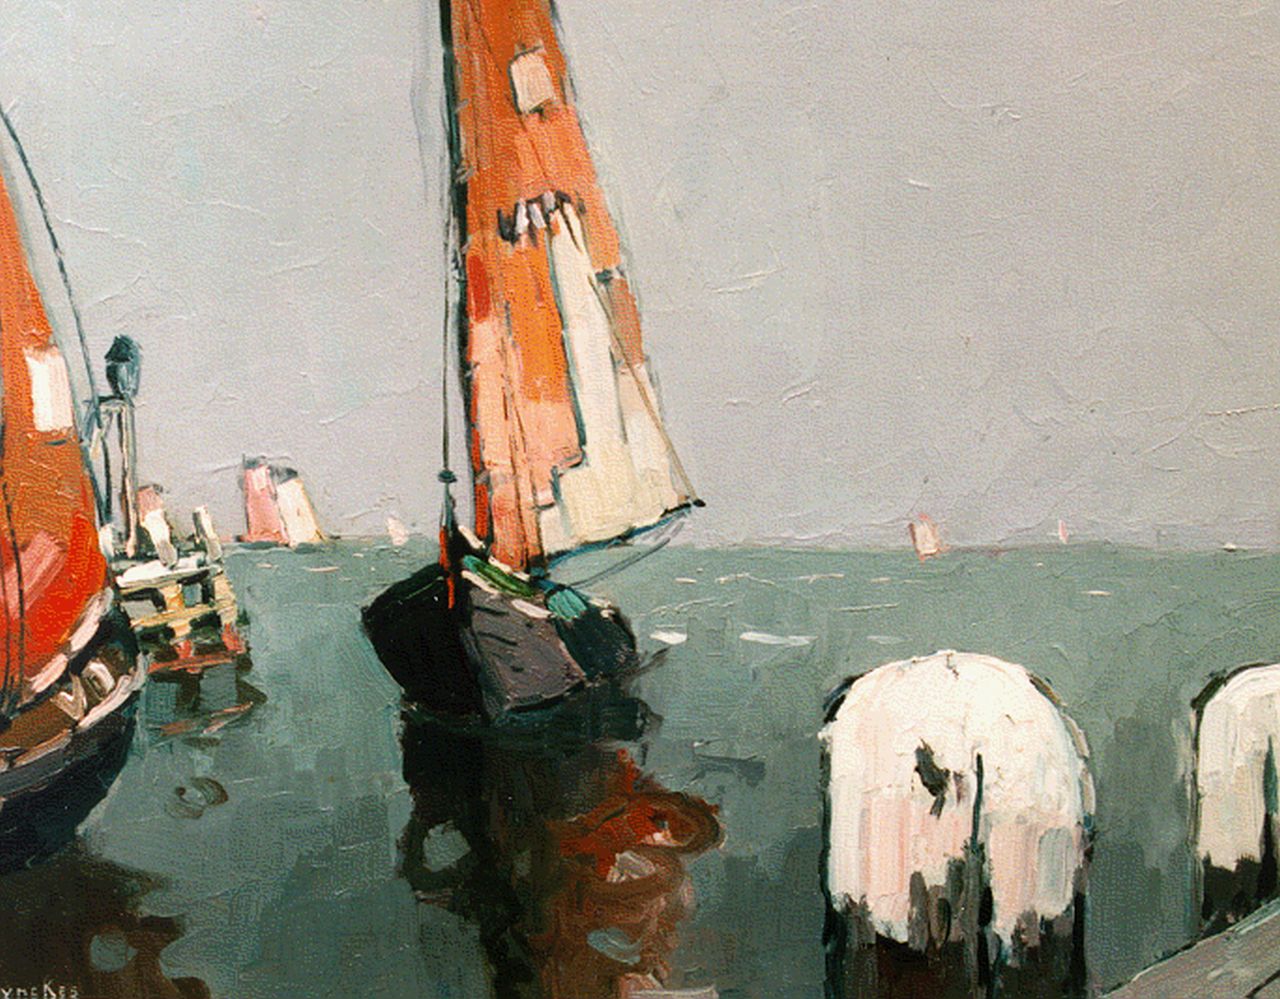 Hynckes R.  | Raoul Hynckes, Shipping on the Zuiderzee, oil on panel 42.3 x 56.0 cm, signed l.l.